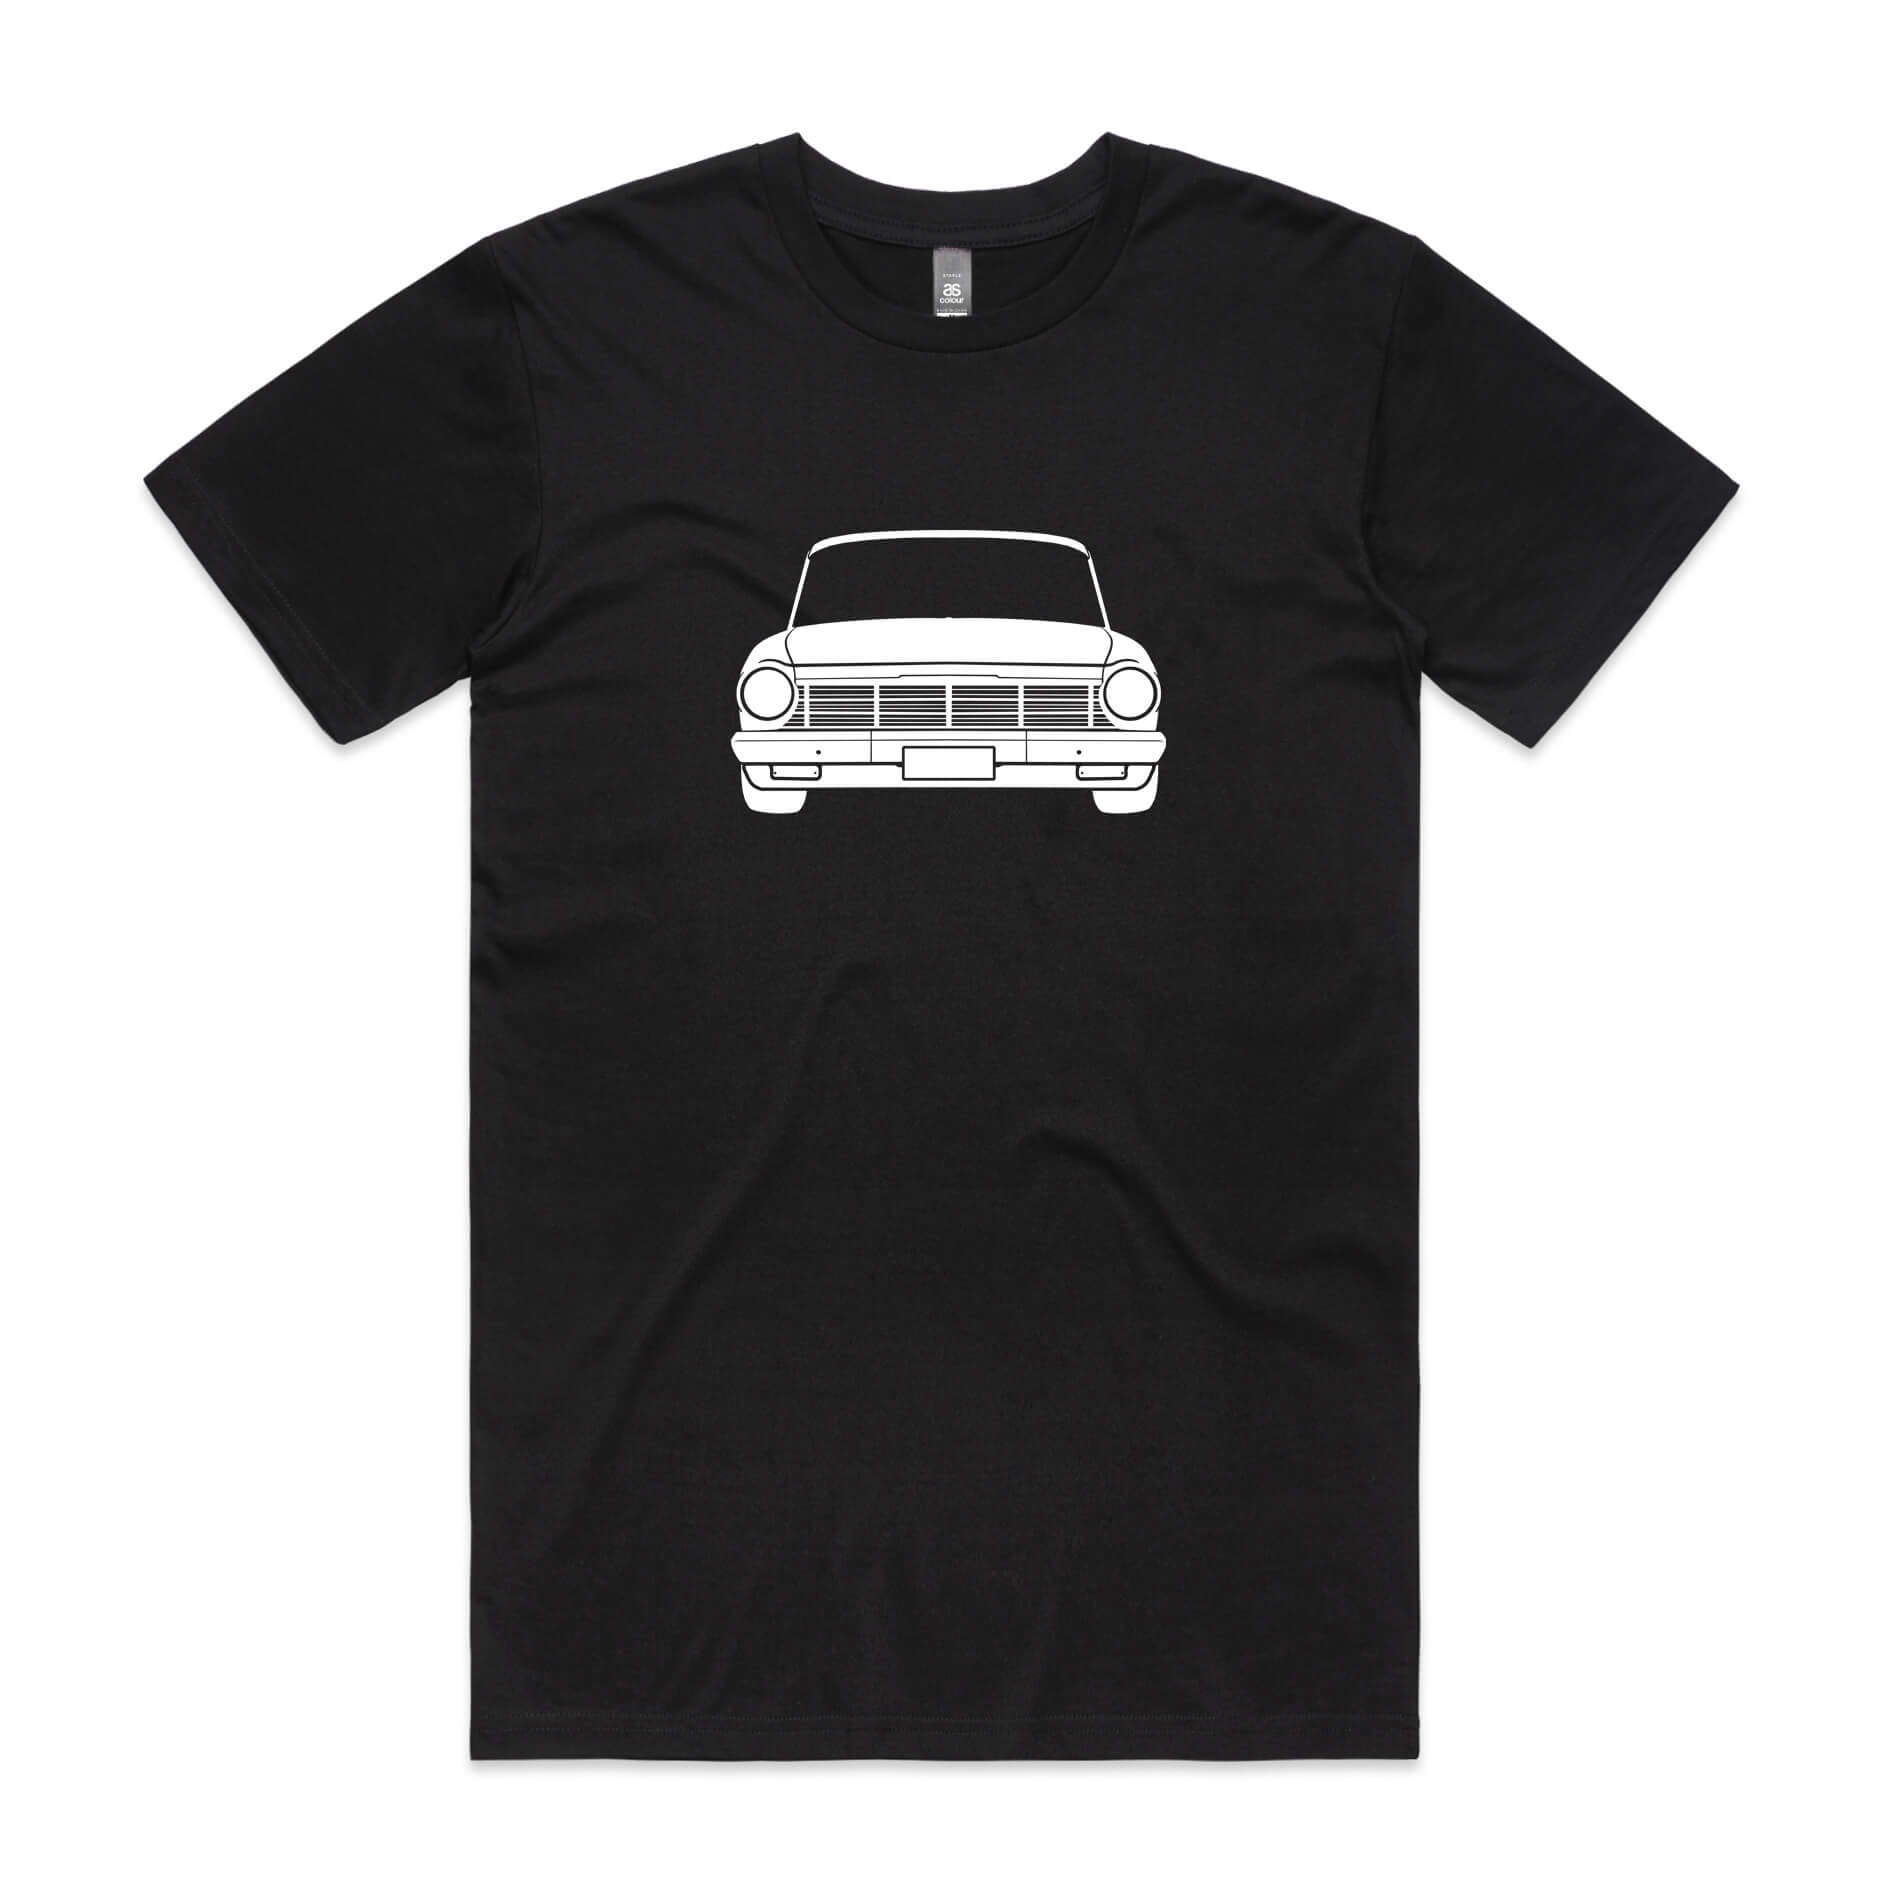 Holden EH t-shirt in black with white classic car graphic